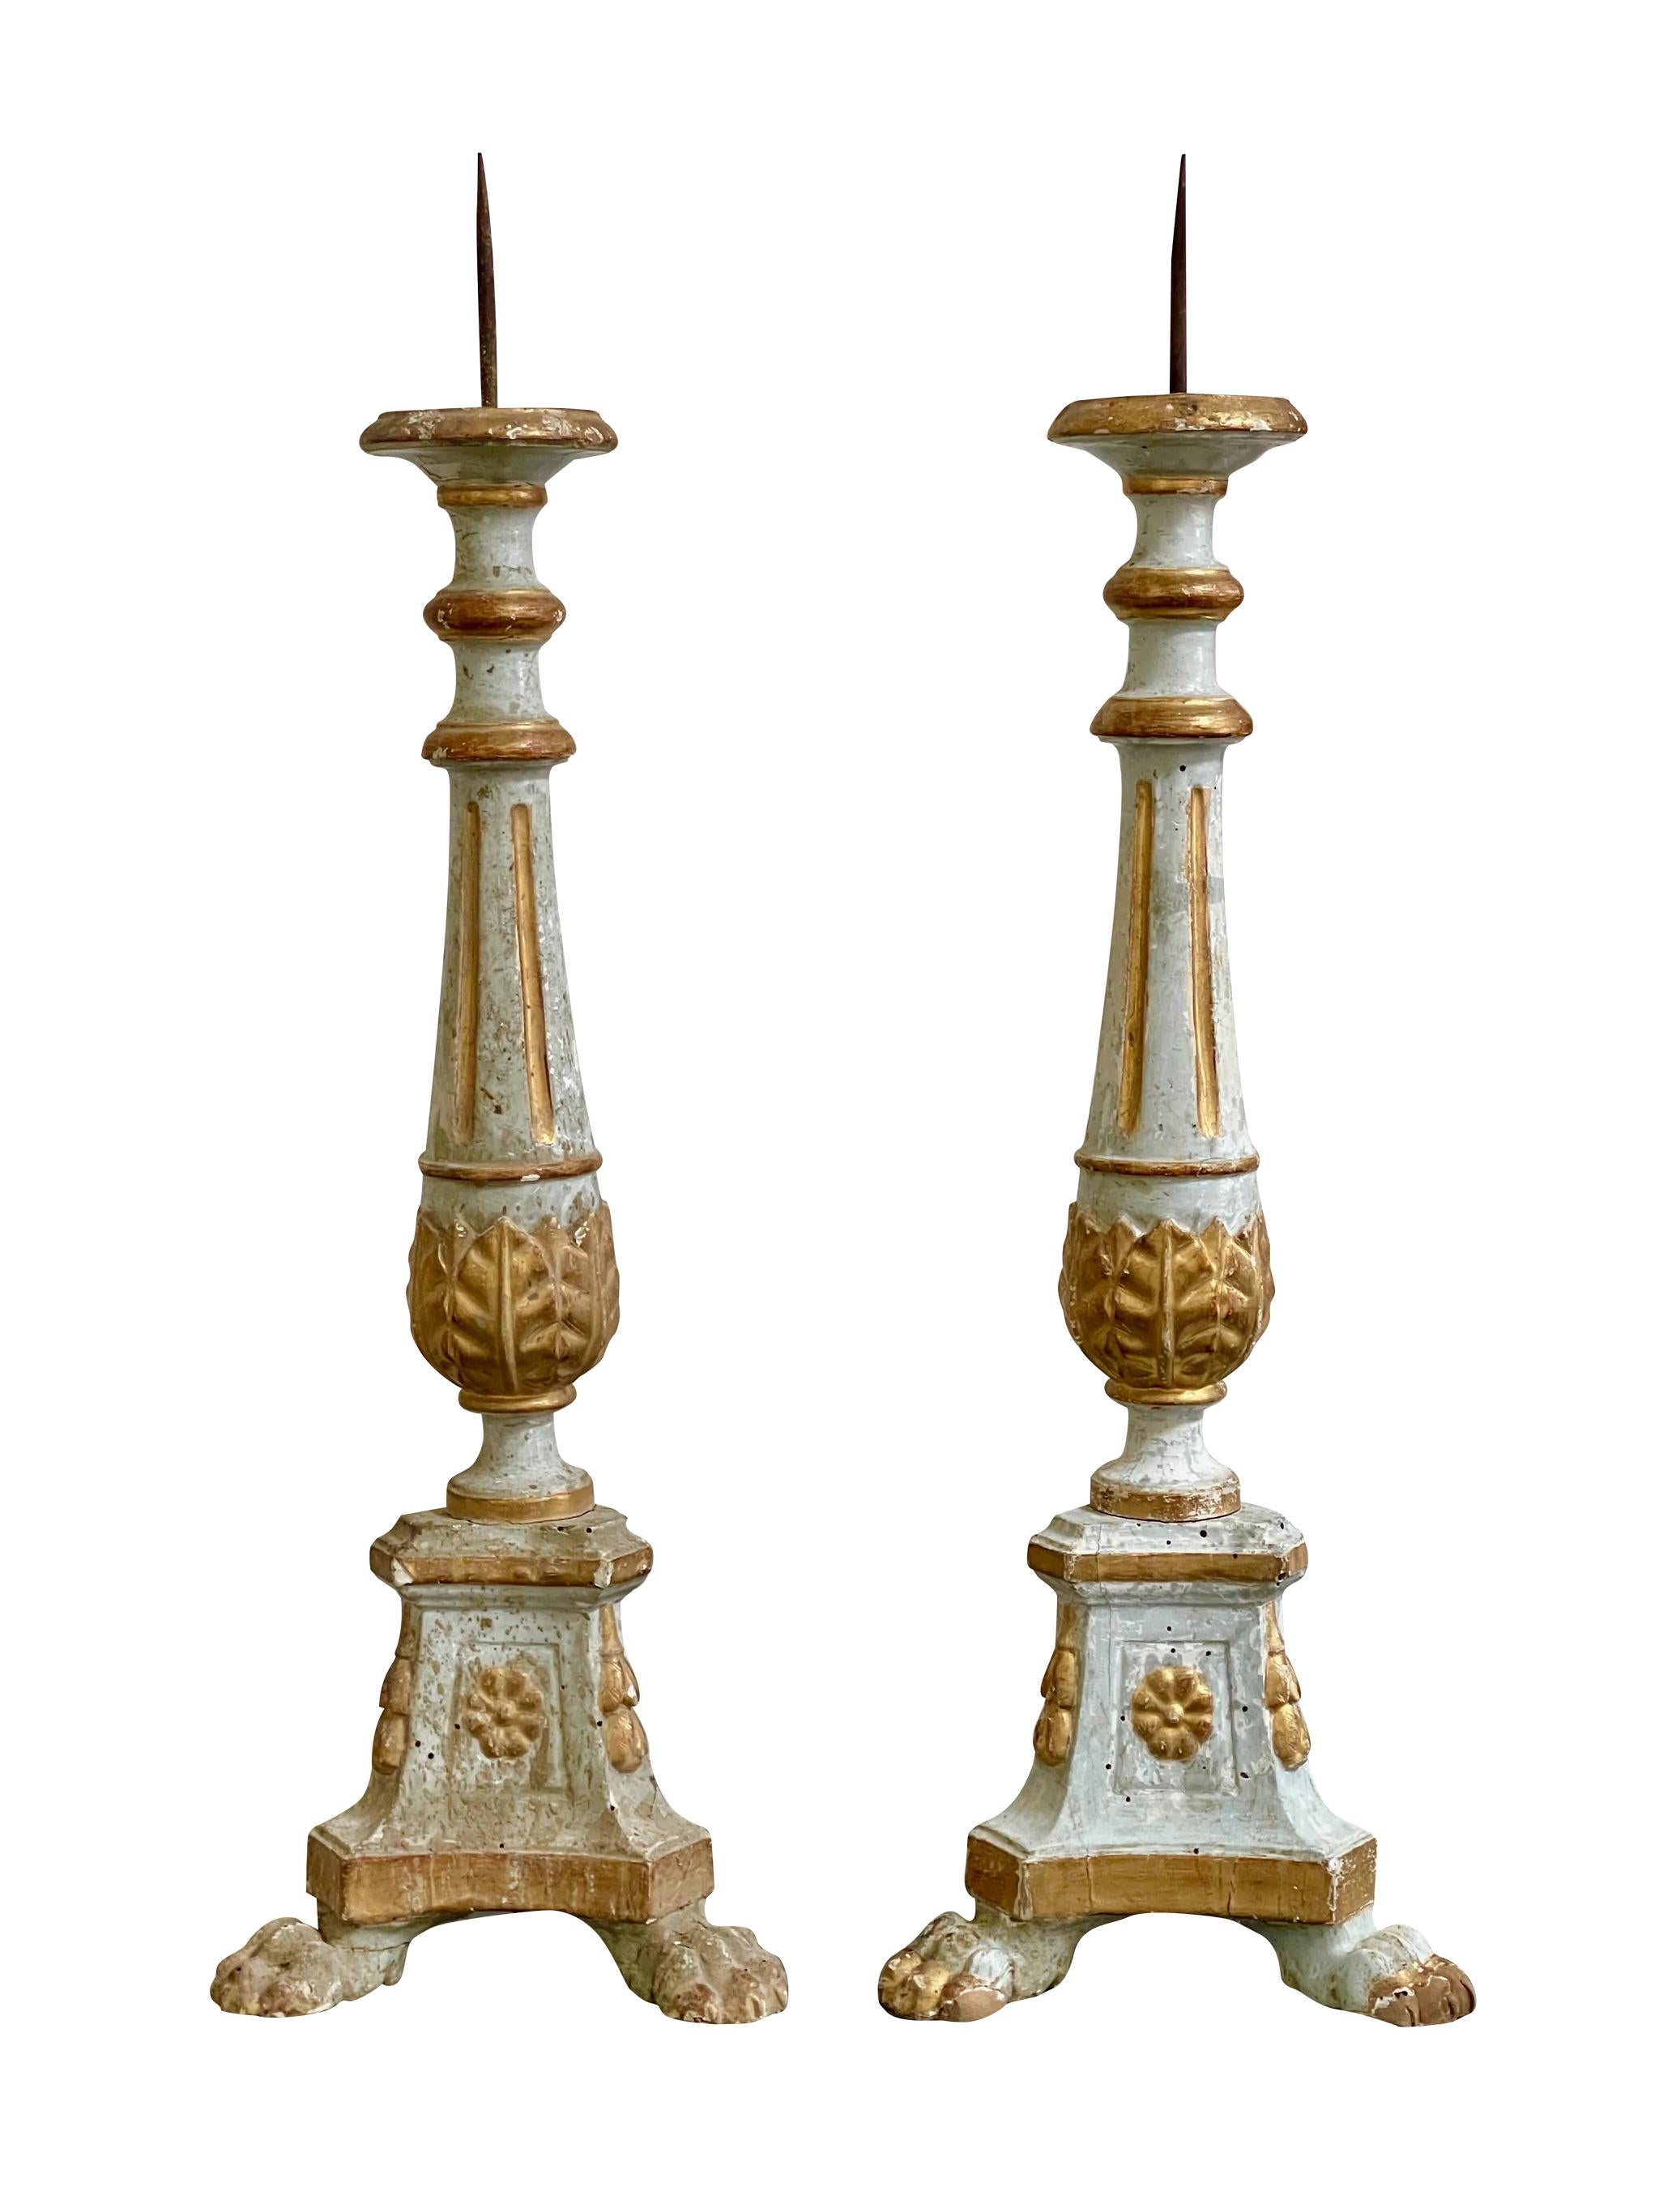 Pair of 18th Century Tuscan Italian pricket sticks, pale blue- polychrome, having acanthus detail and paw feet, Tuscany.
 